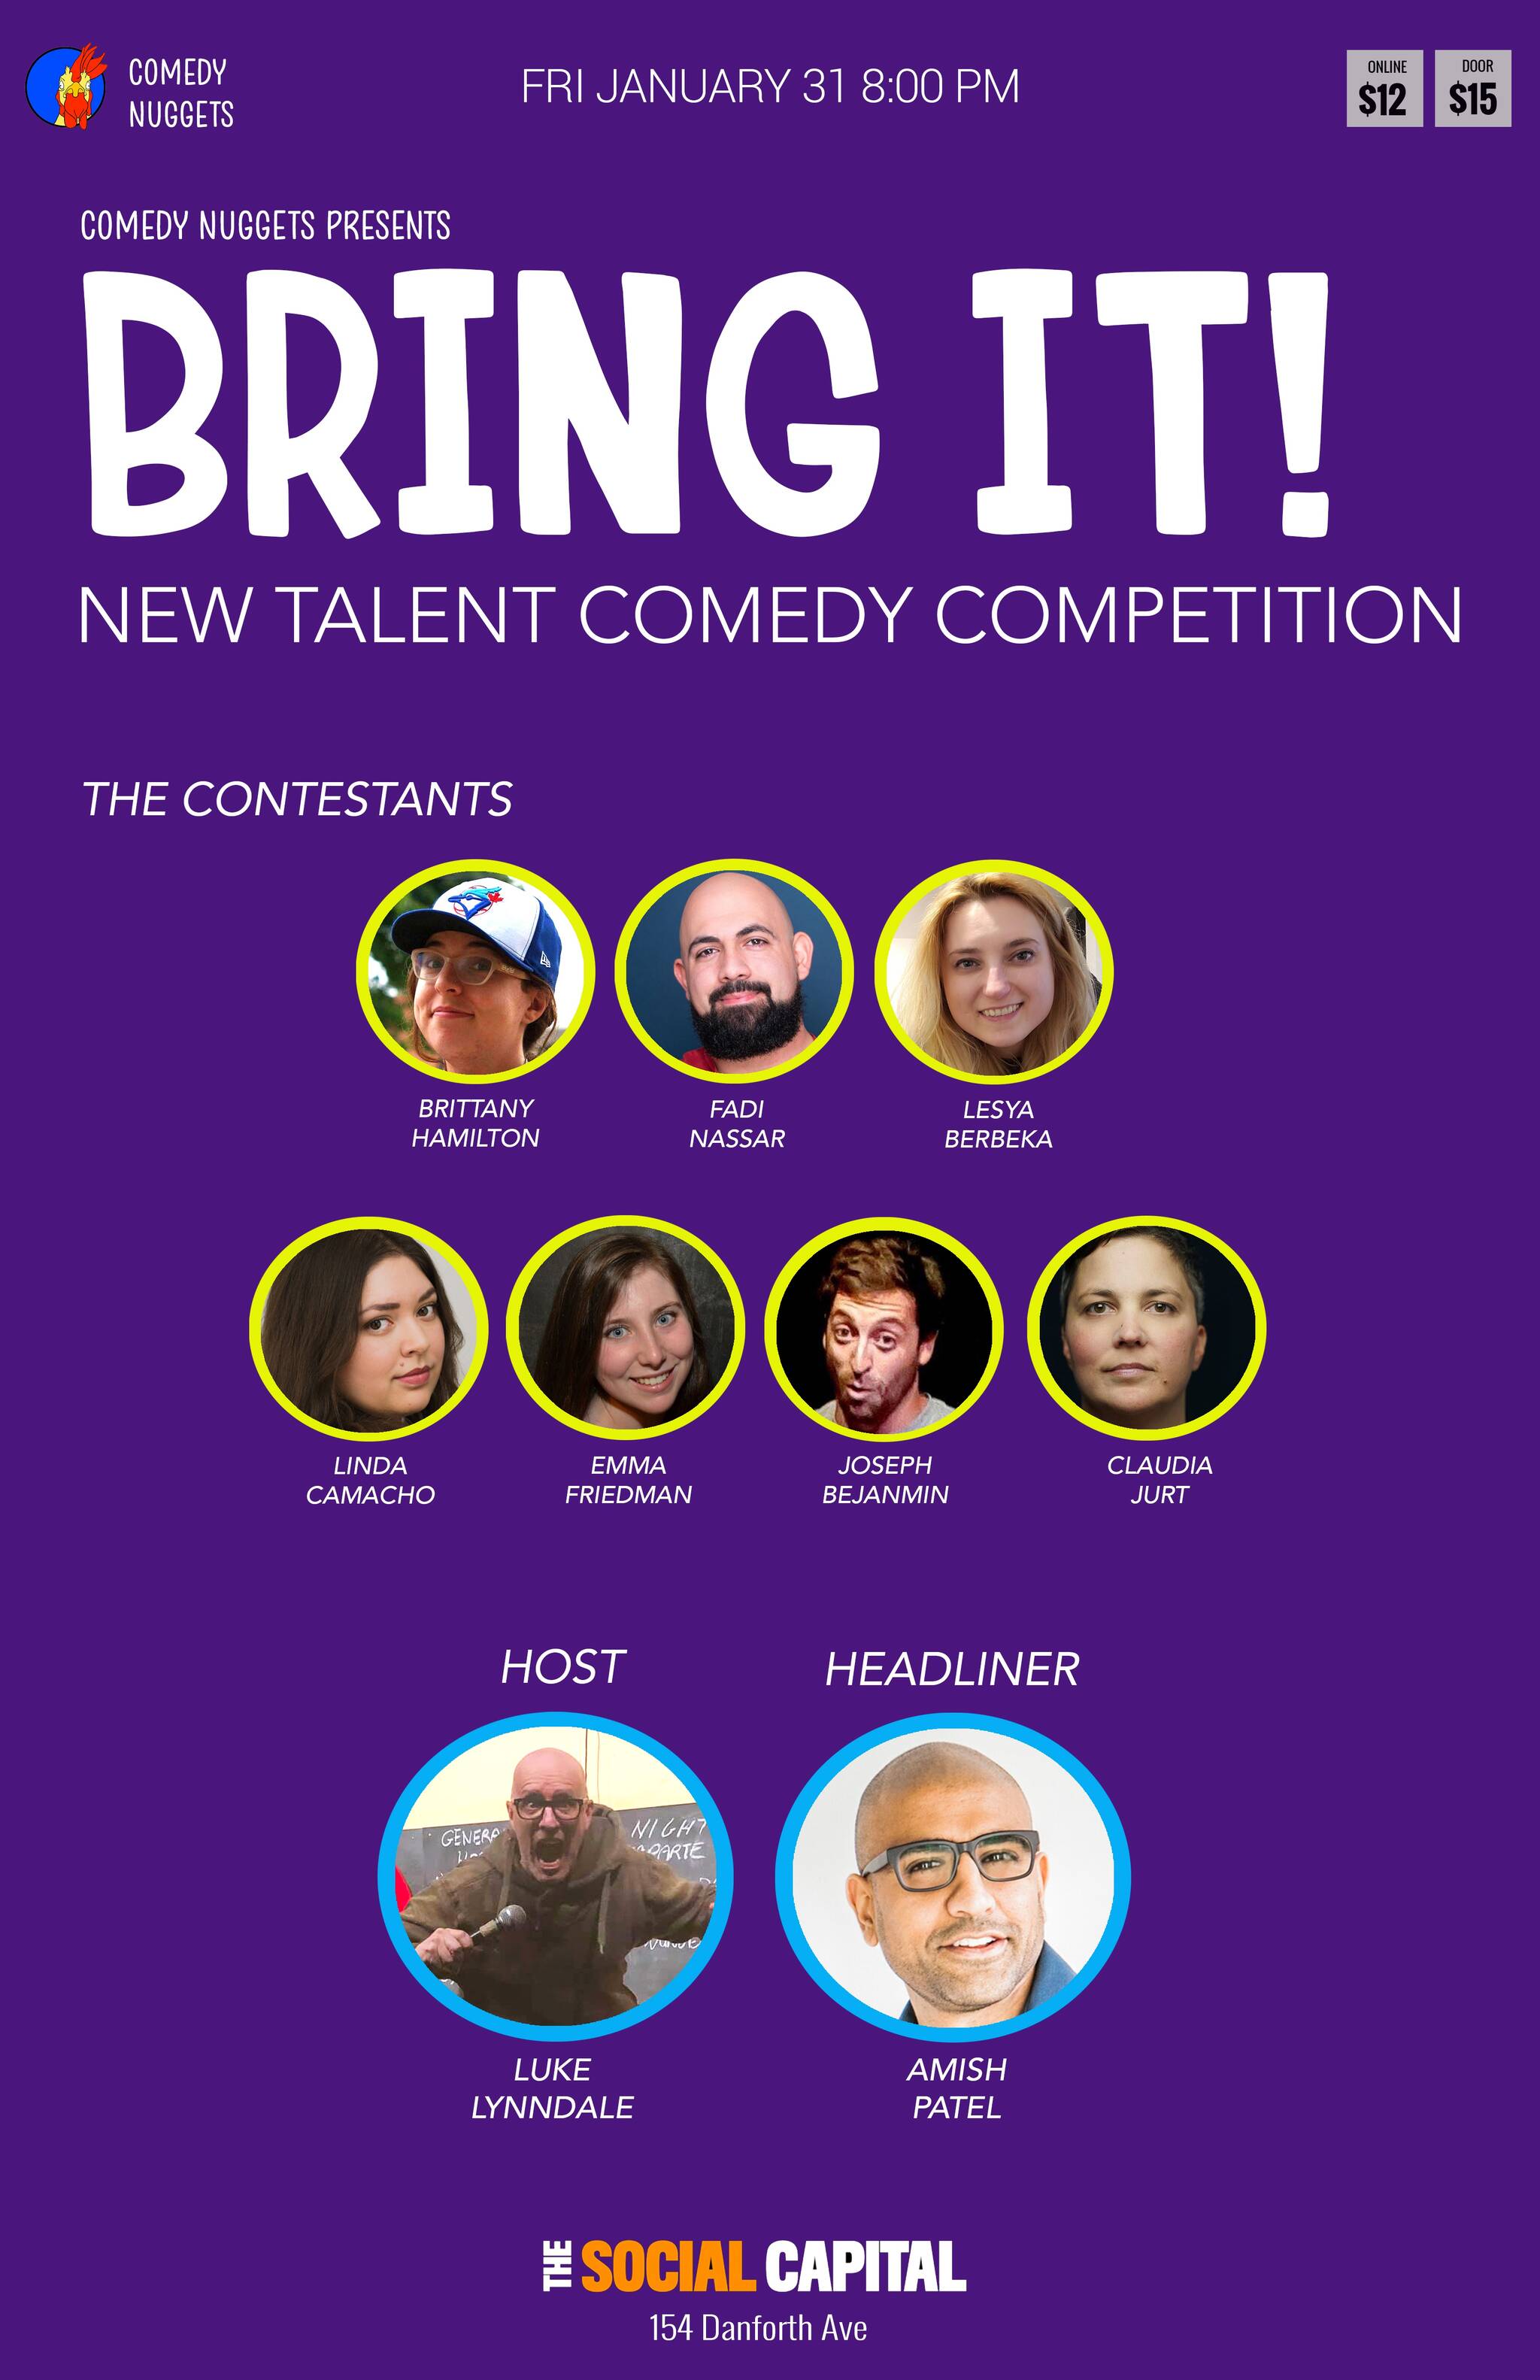 Bring It! New Talent Comedy Competition